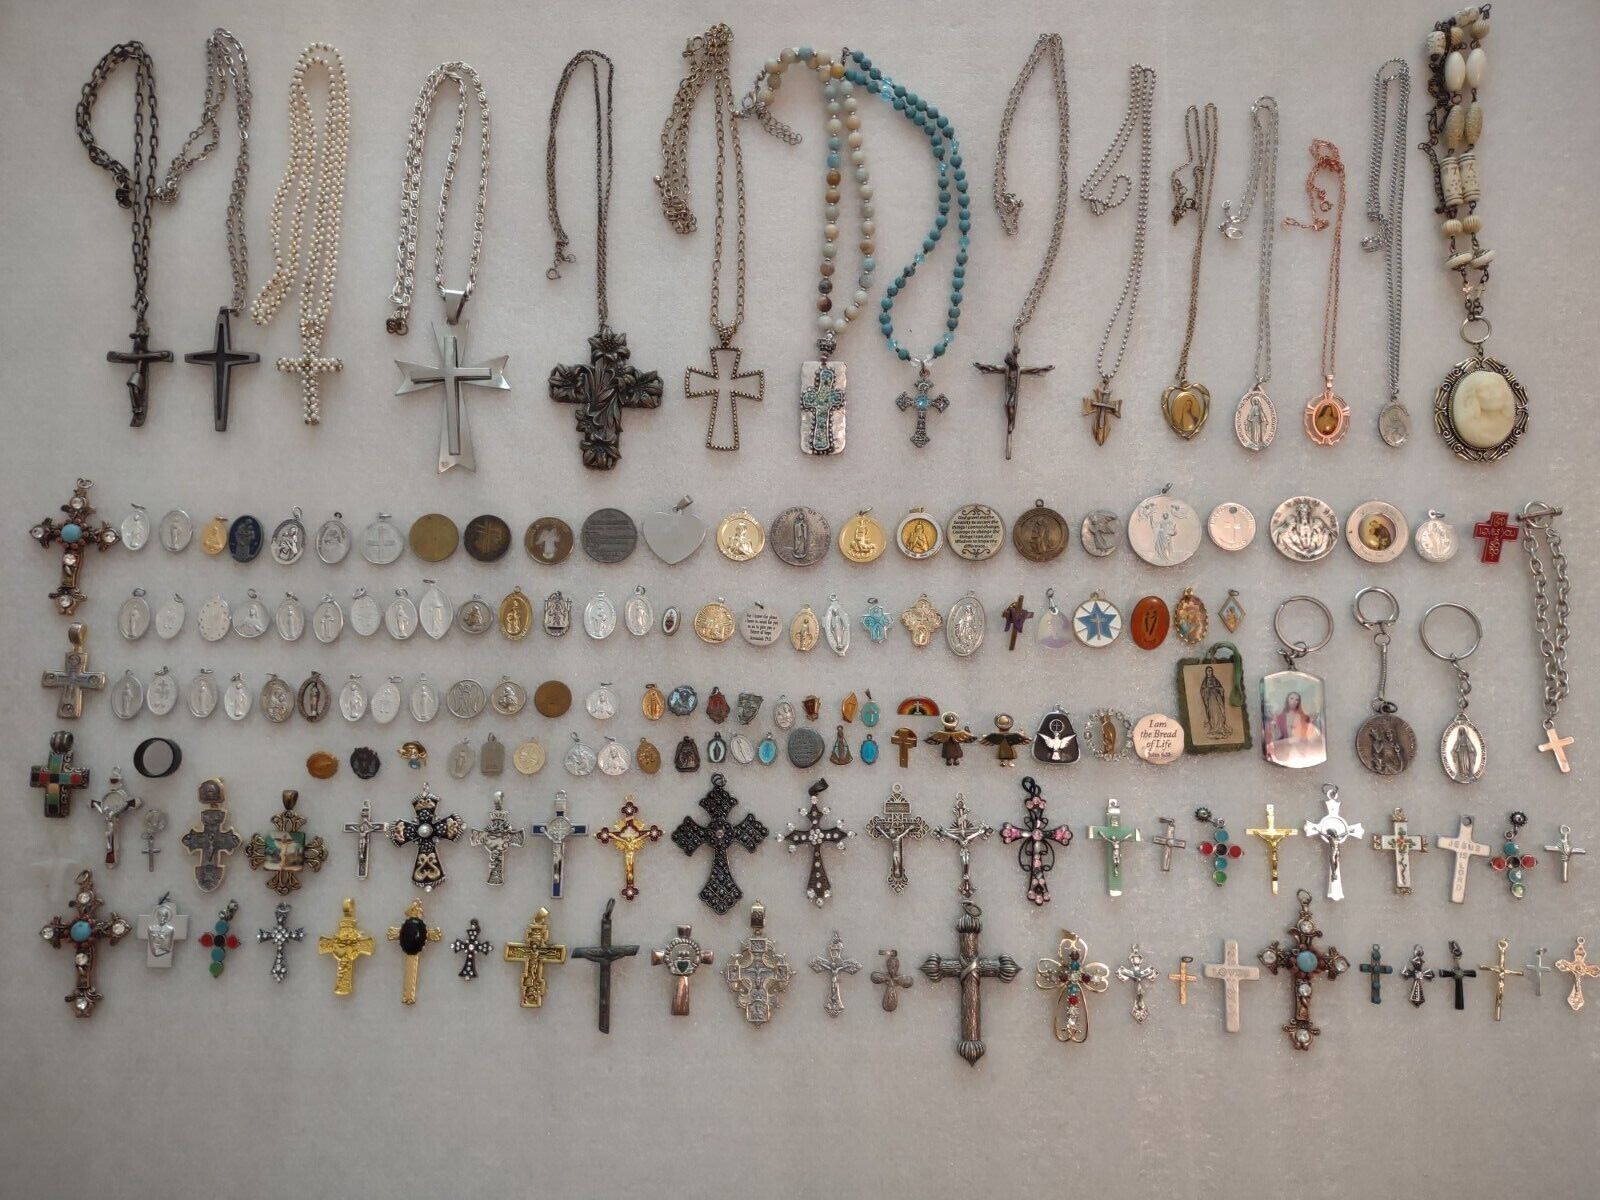 Huge Lot of Religious Jewelry Catholic Crosses Necklaces Pendants Medals Pins